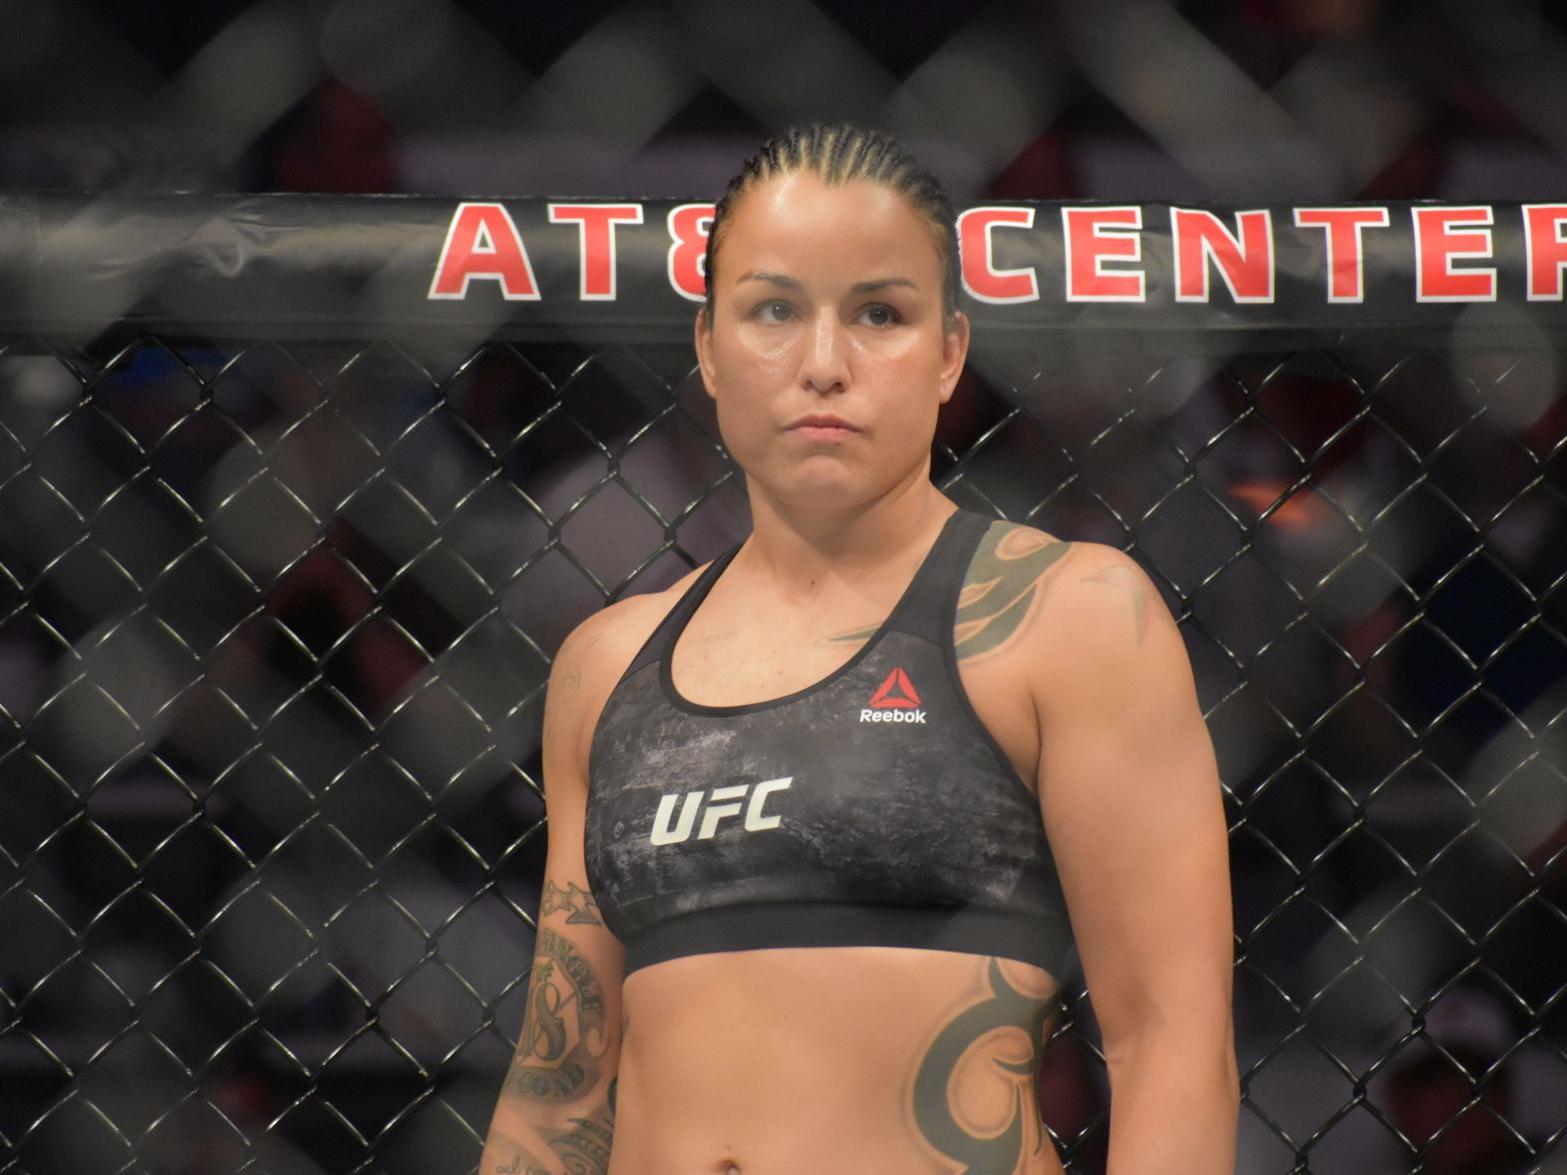 Raquel Pennington intends to fight again this year, capitalizing on  momentum from UFC victory, Sports